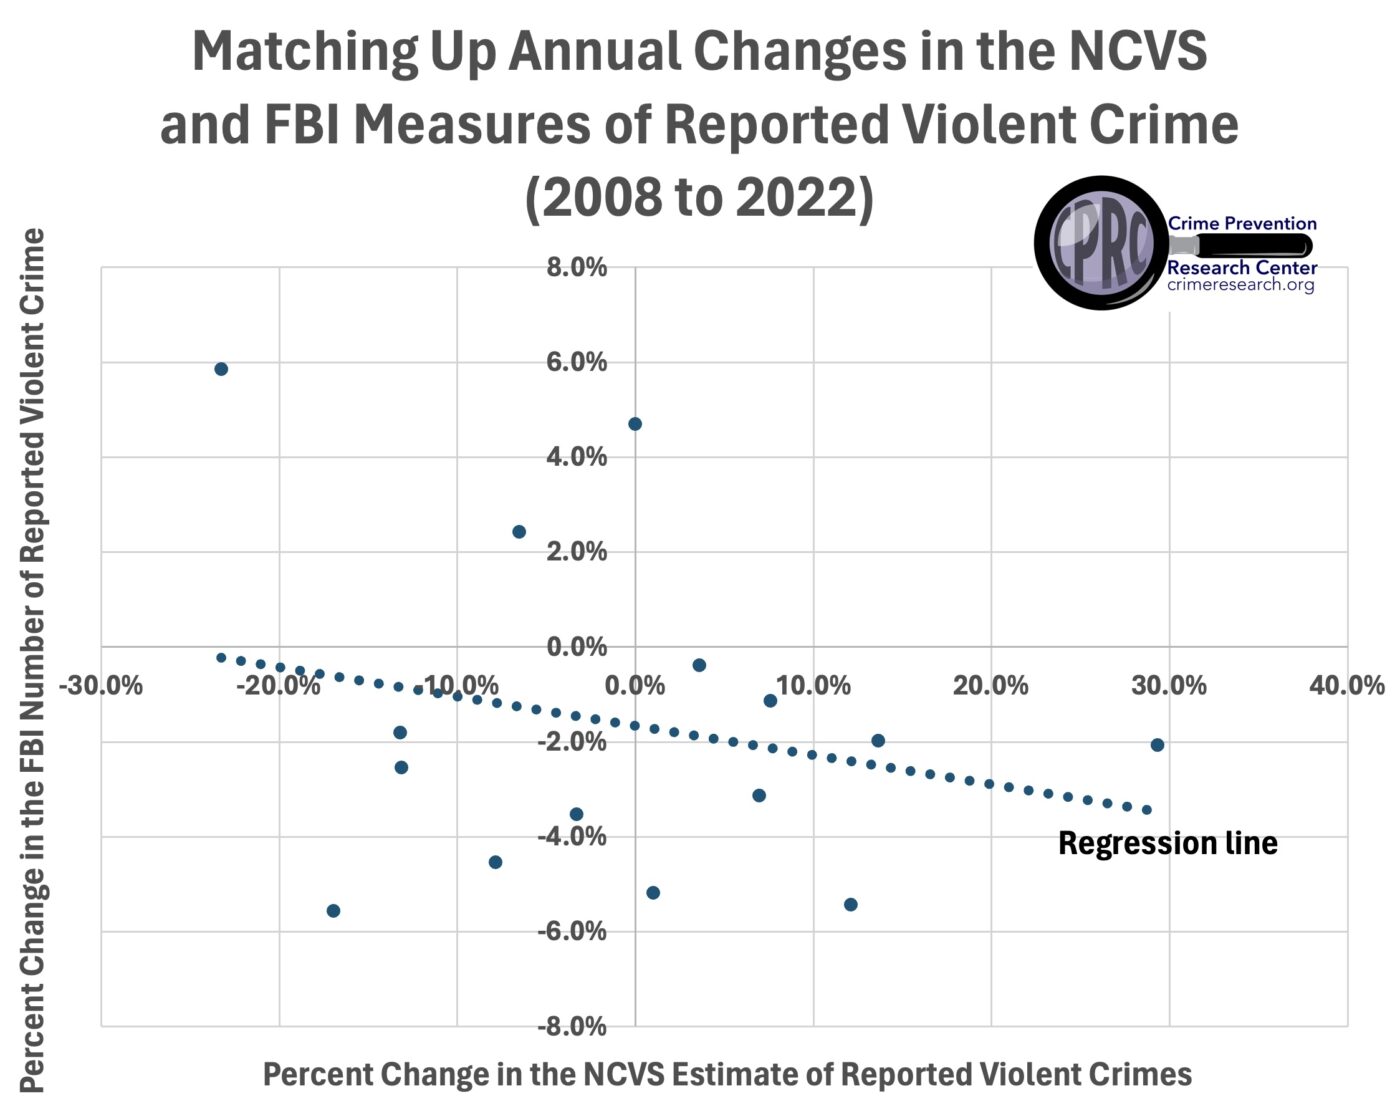 How reliable are the FBI’s Report of Violent Crime Data? There are some major problems.